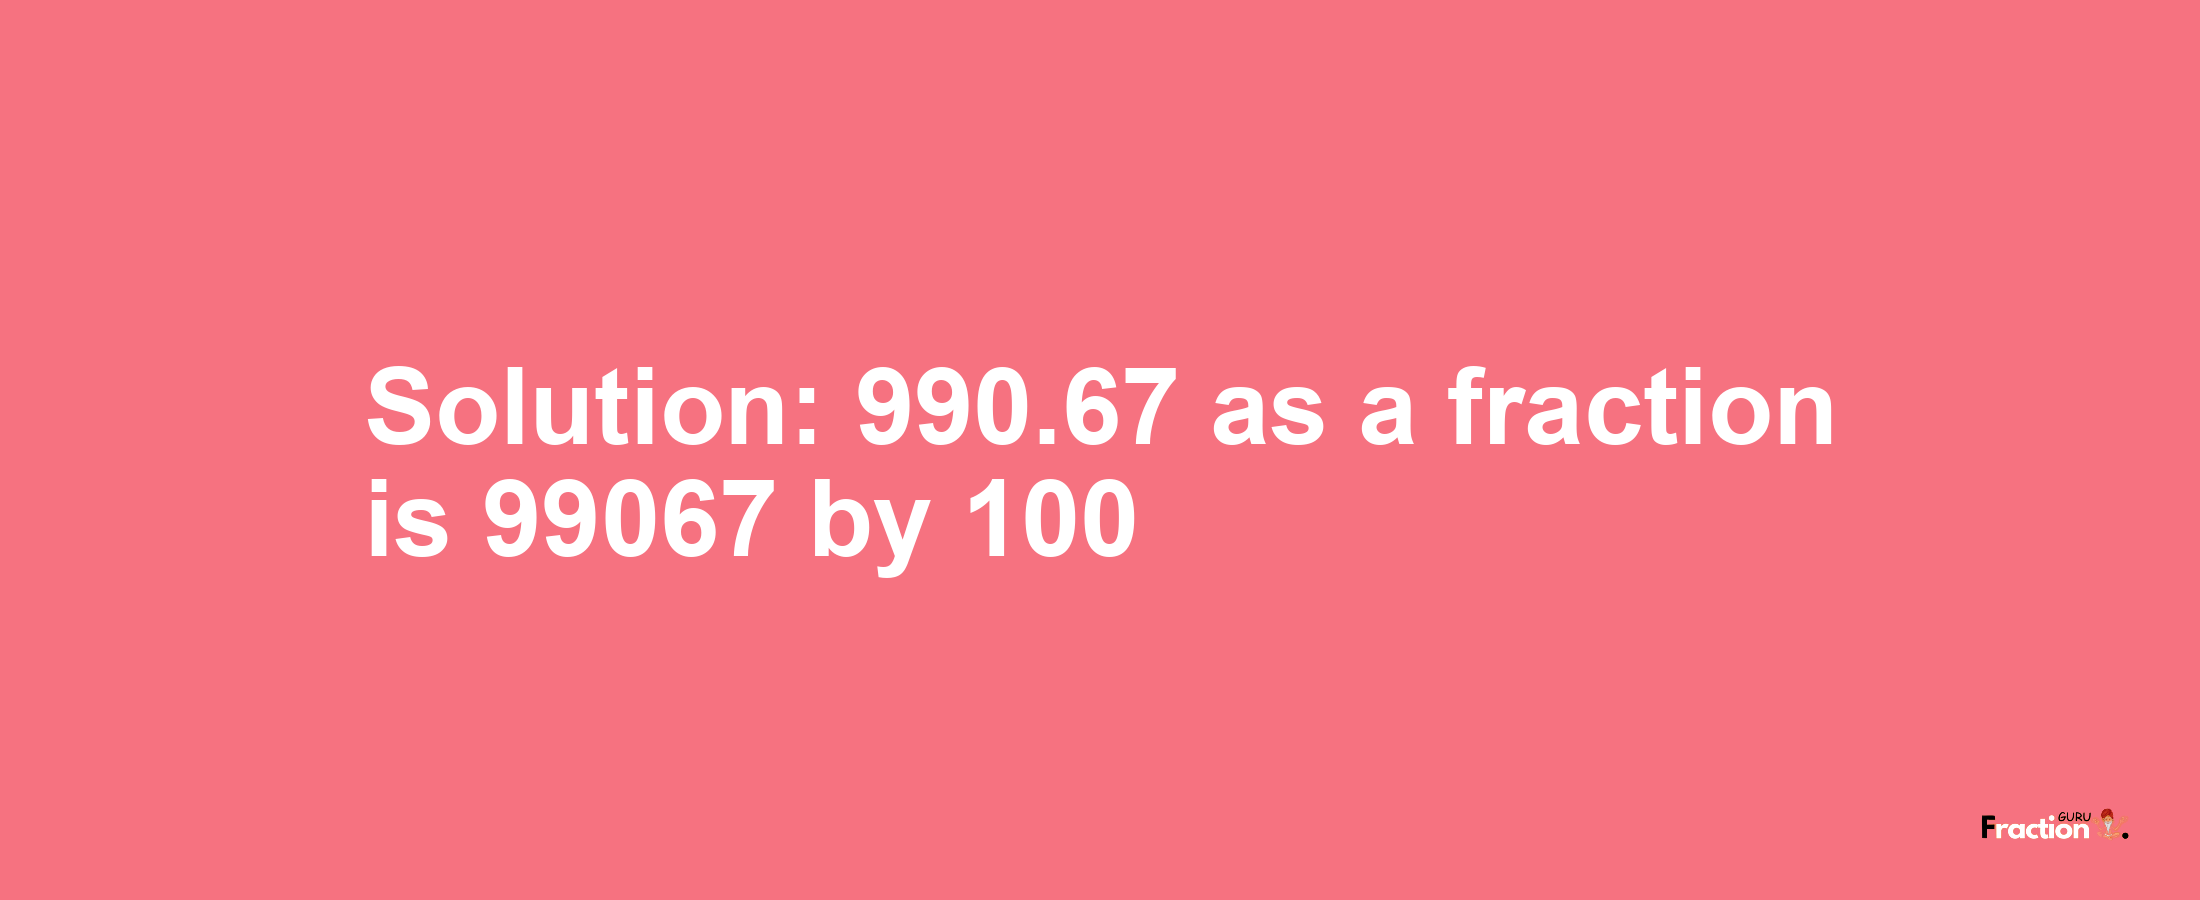 Solution:990.67 as a fraction is 99067/100